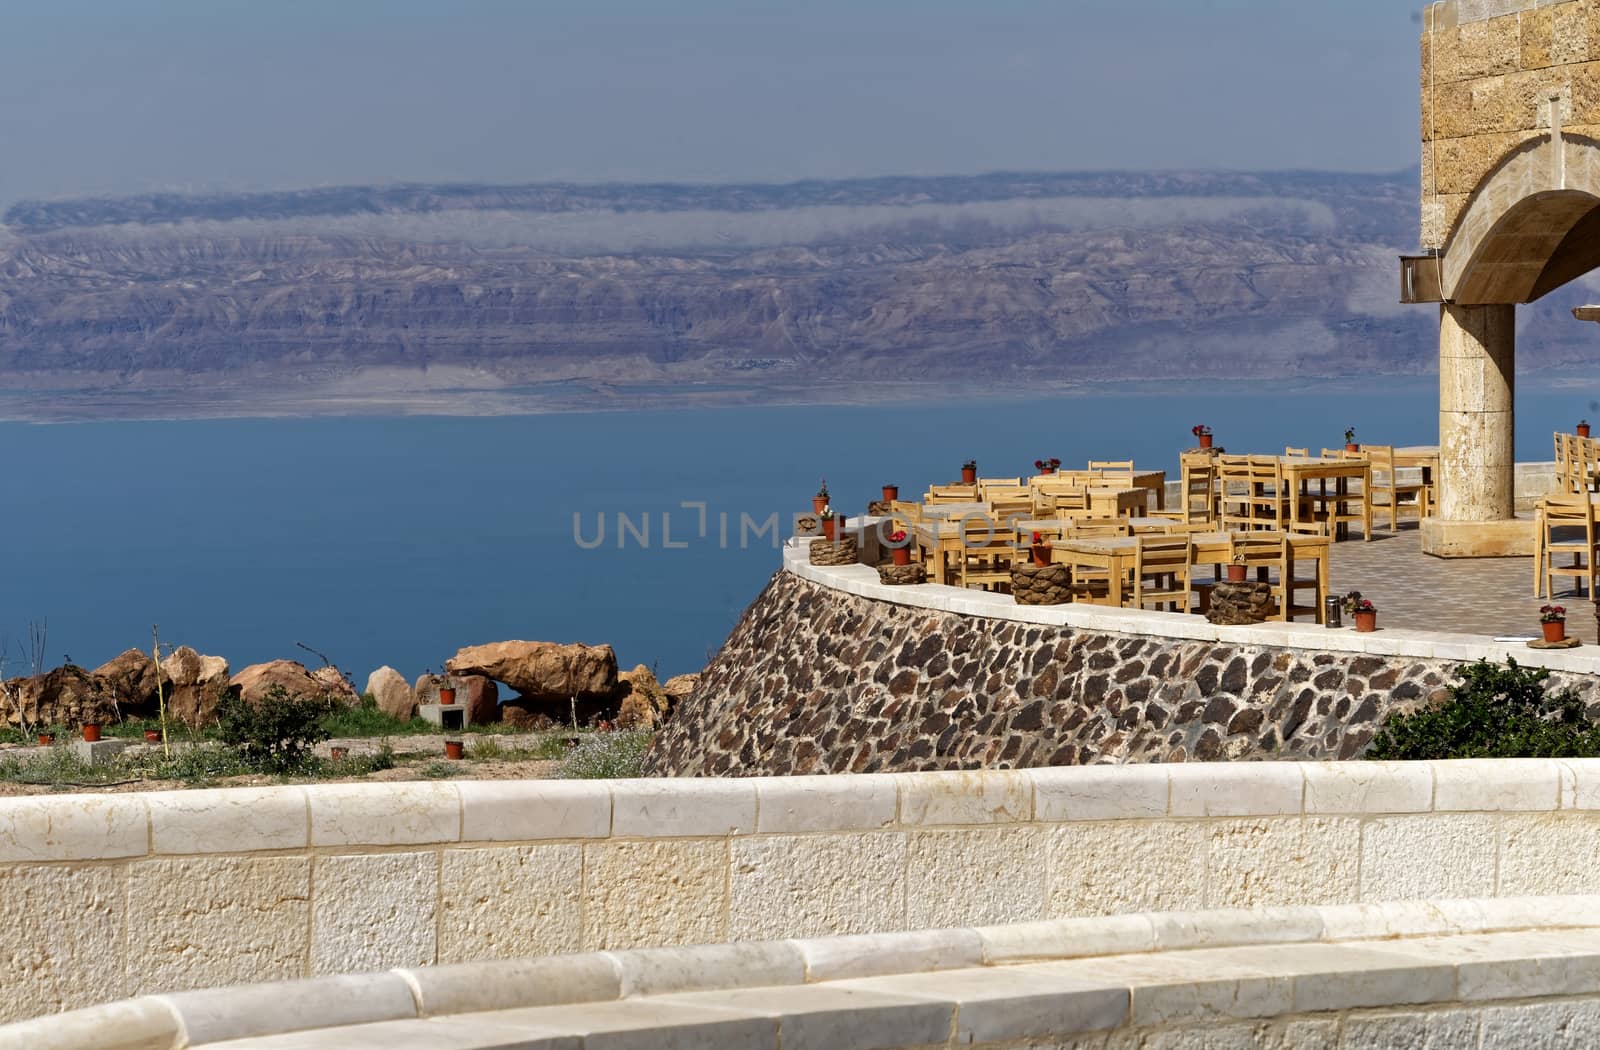 View over the terrace of the museum at the Dead Sea in Jordan with the mountains of Israel on the opposite bank by geogif